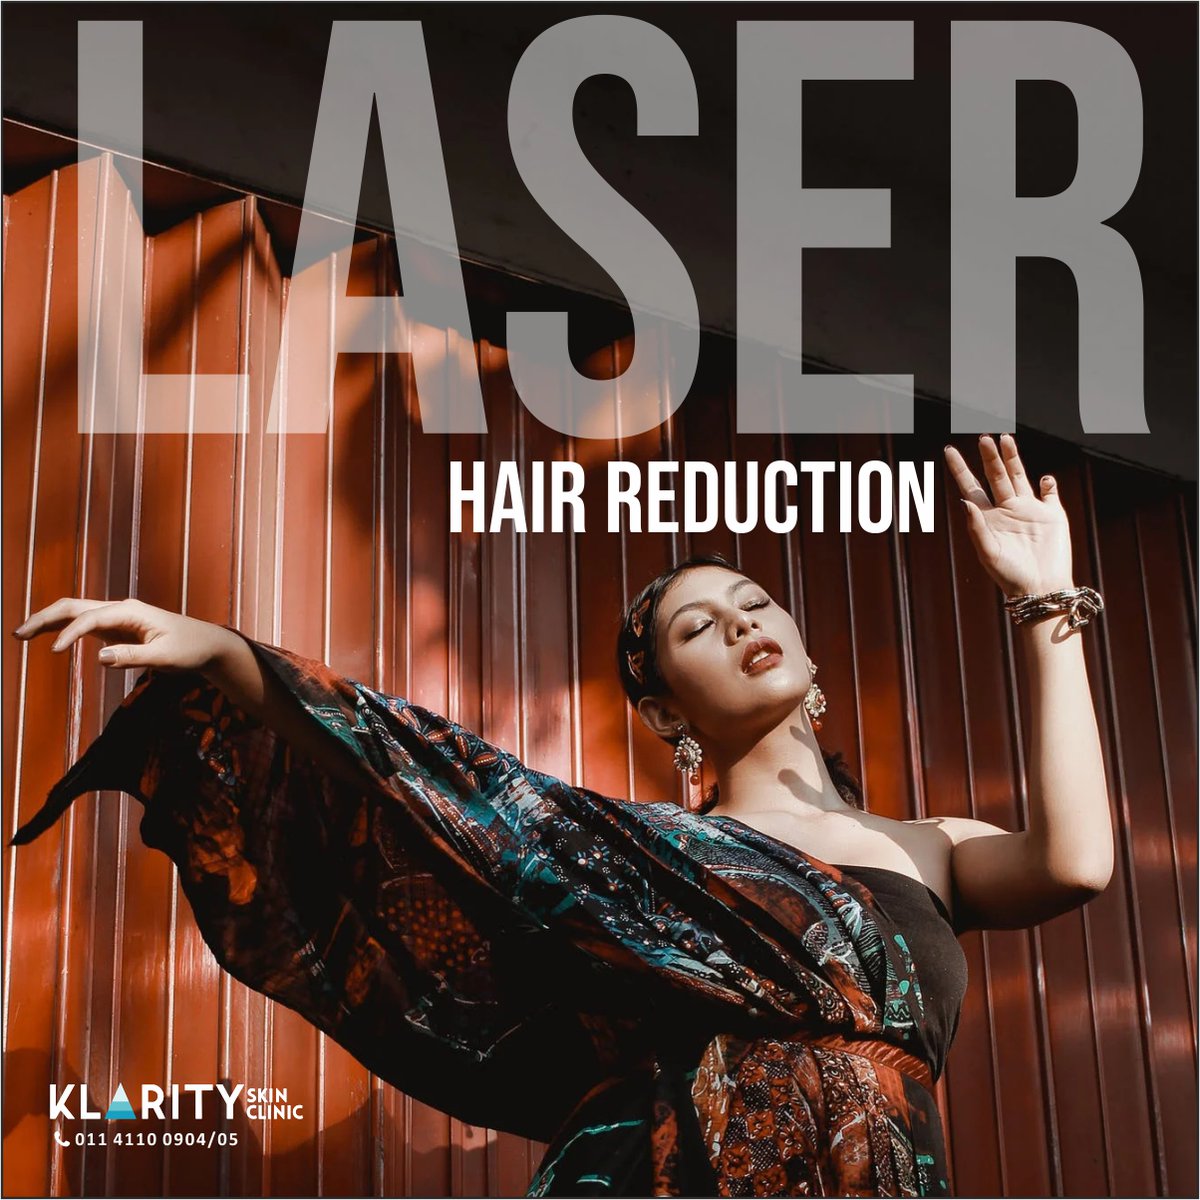 Laser Hair Removal is a good option to go for over temporary solutions since it offers a long-term solution to unwanted body hair and gives you the freedom to wear your favourite dresses 
#laserhairreduction #hairfreecarefree #waxing #threading #hairemovalcream #epilators